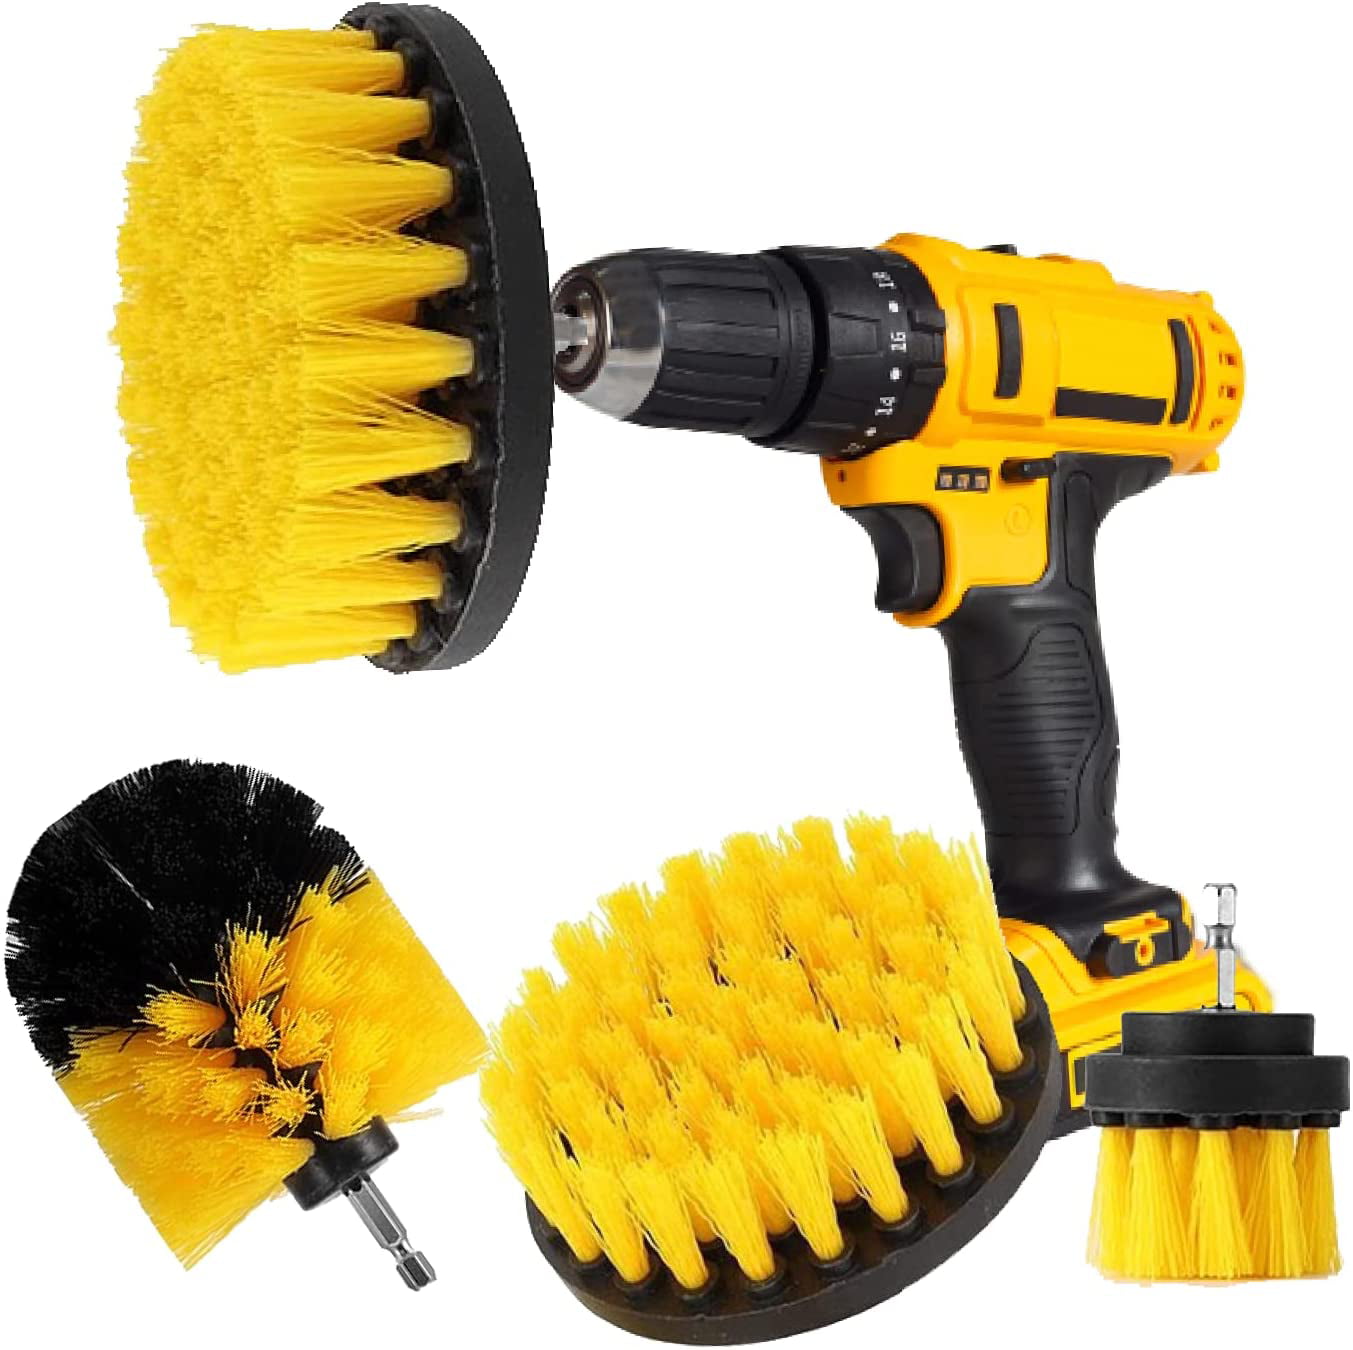 3Pcs Tile Grout Drill Brush Power Scrub Cleaning Tub Attachment Cleaner Kit